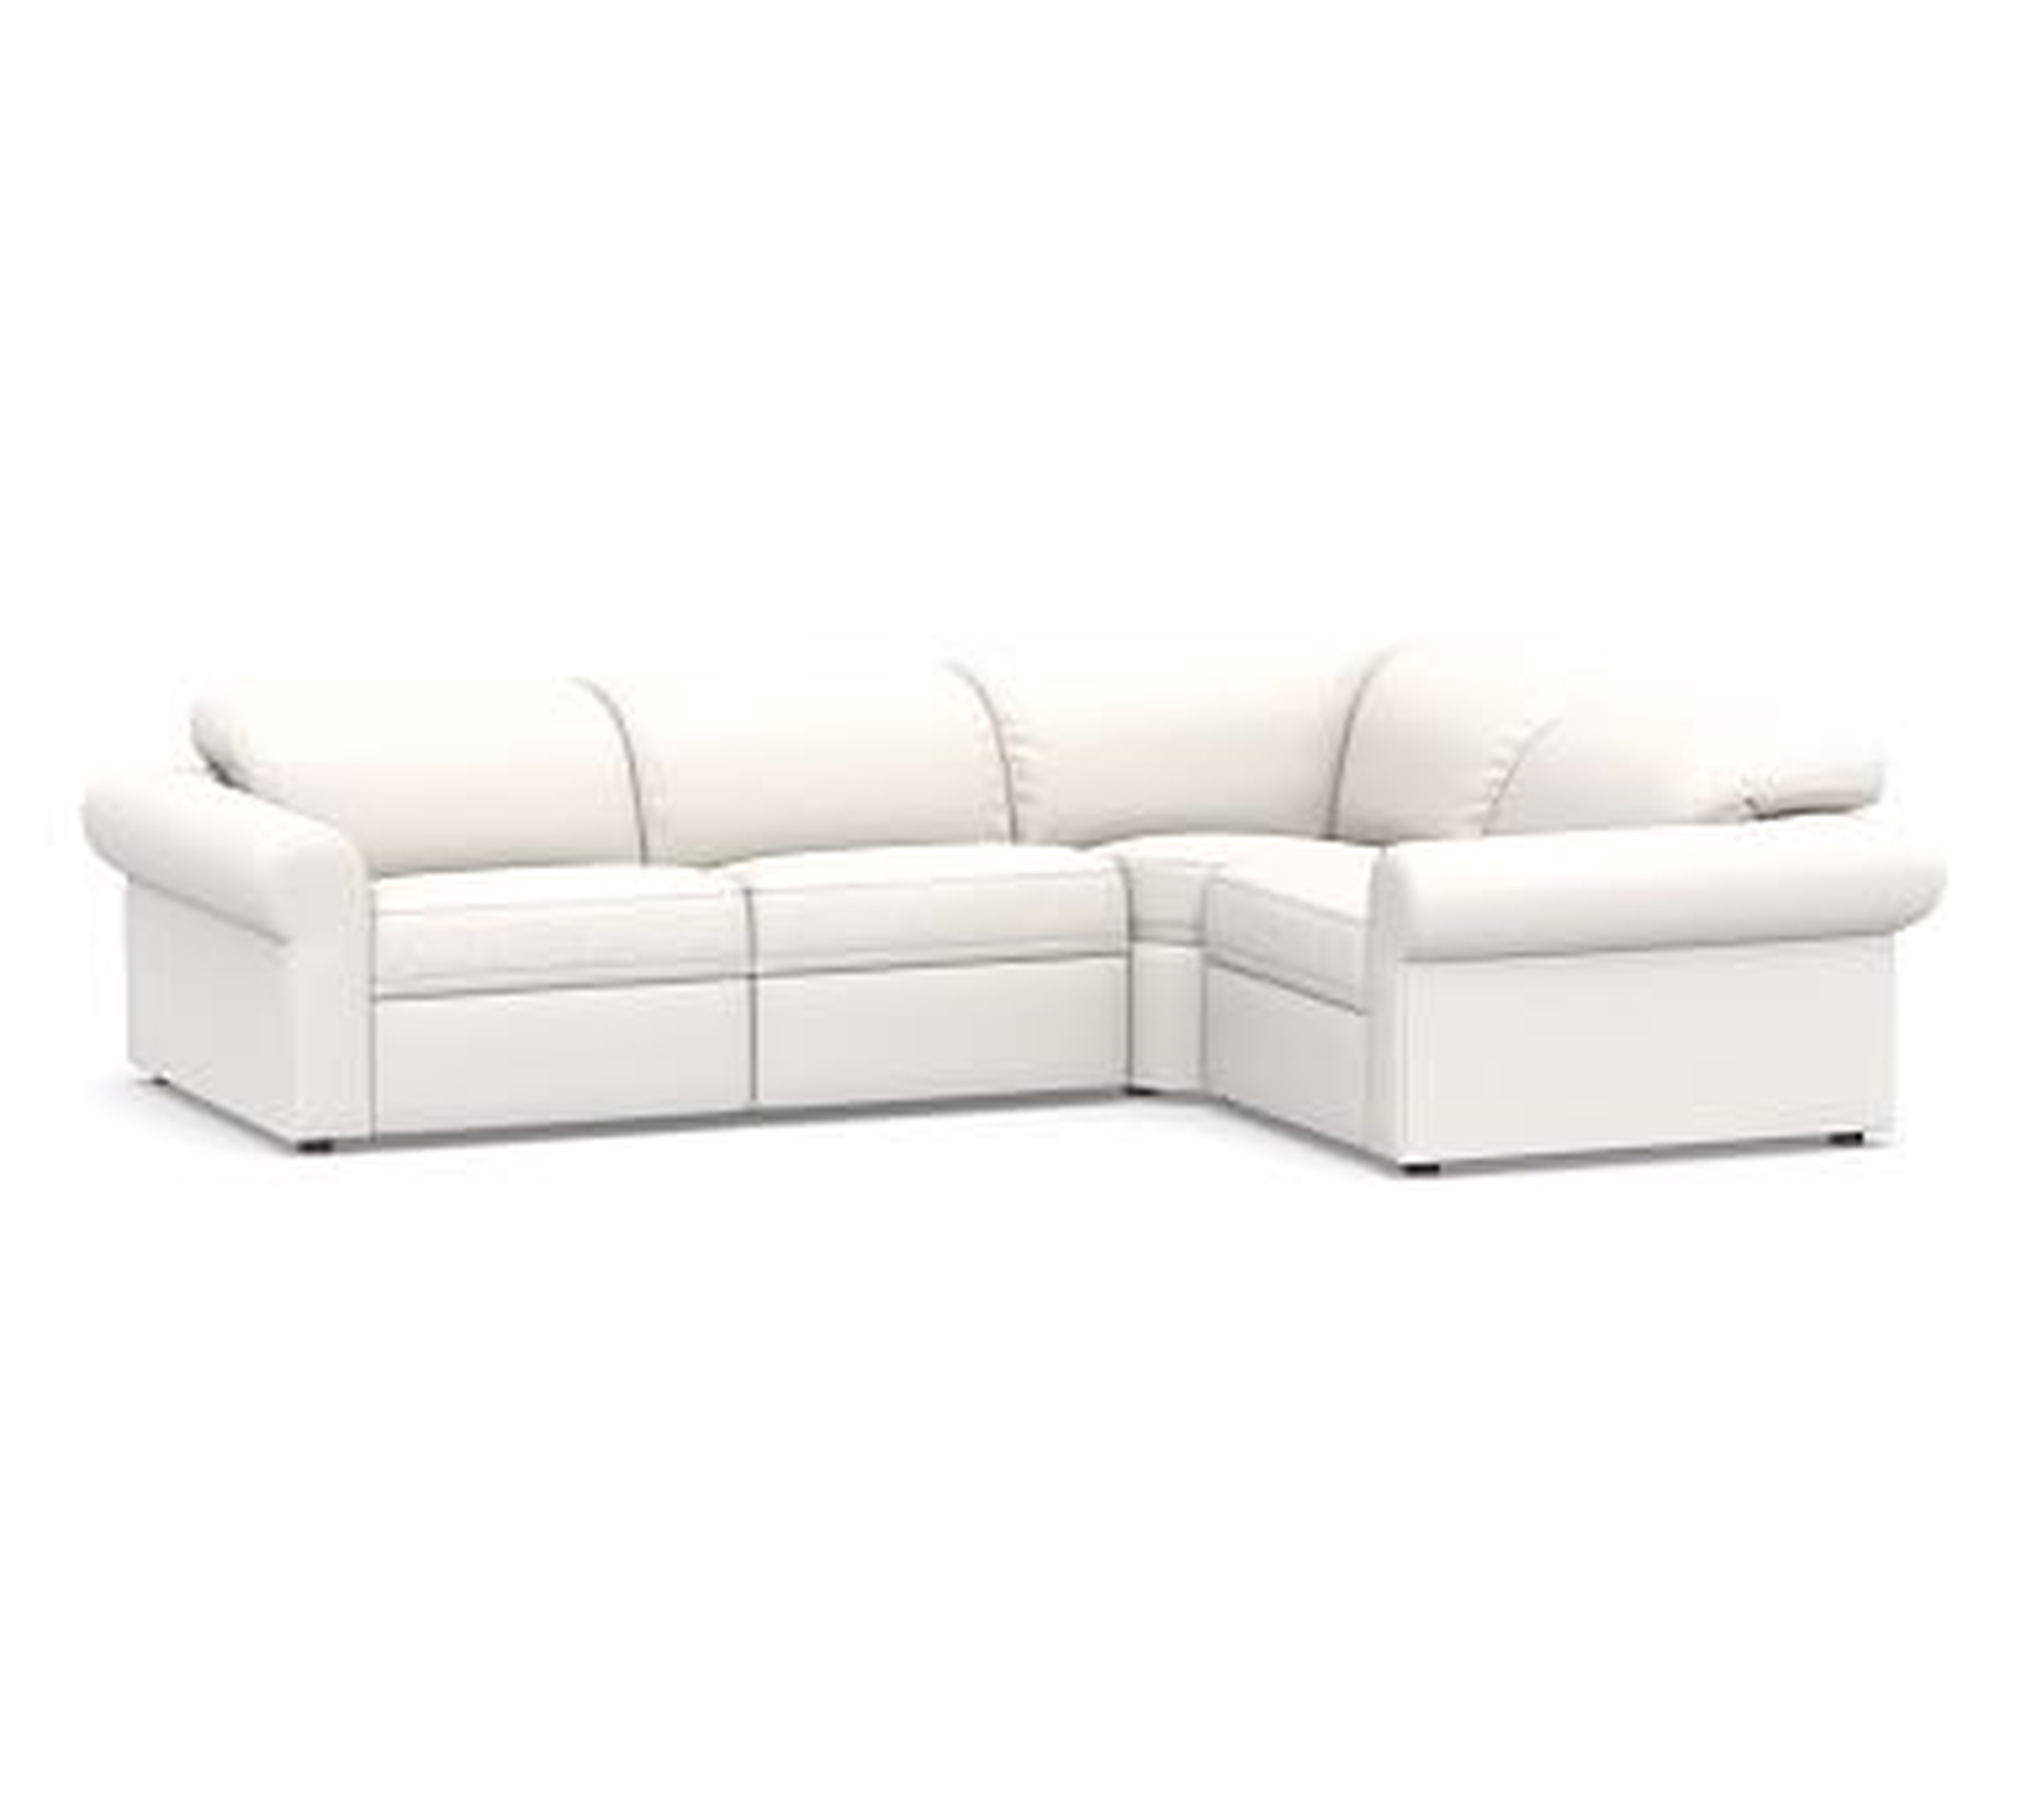 PB Ultra Lounge Roll Arm Upholstered 4-Piece Reclining Sectional, Polyester Wrapped Cushions, Performance Everydaylinen(TM) by Crypton(R) Home Ivory - Pottery Barn